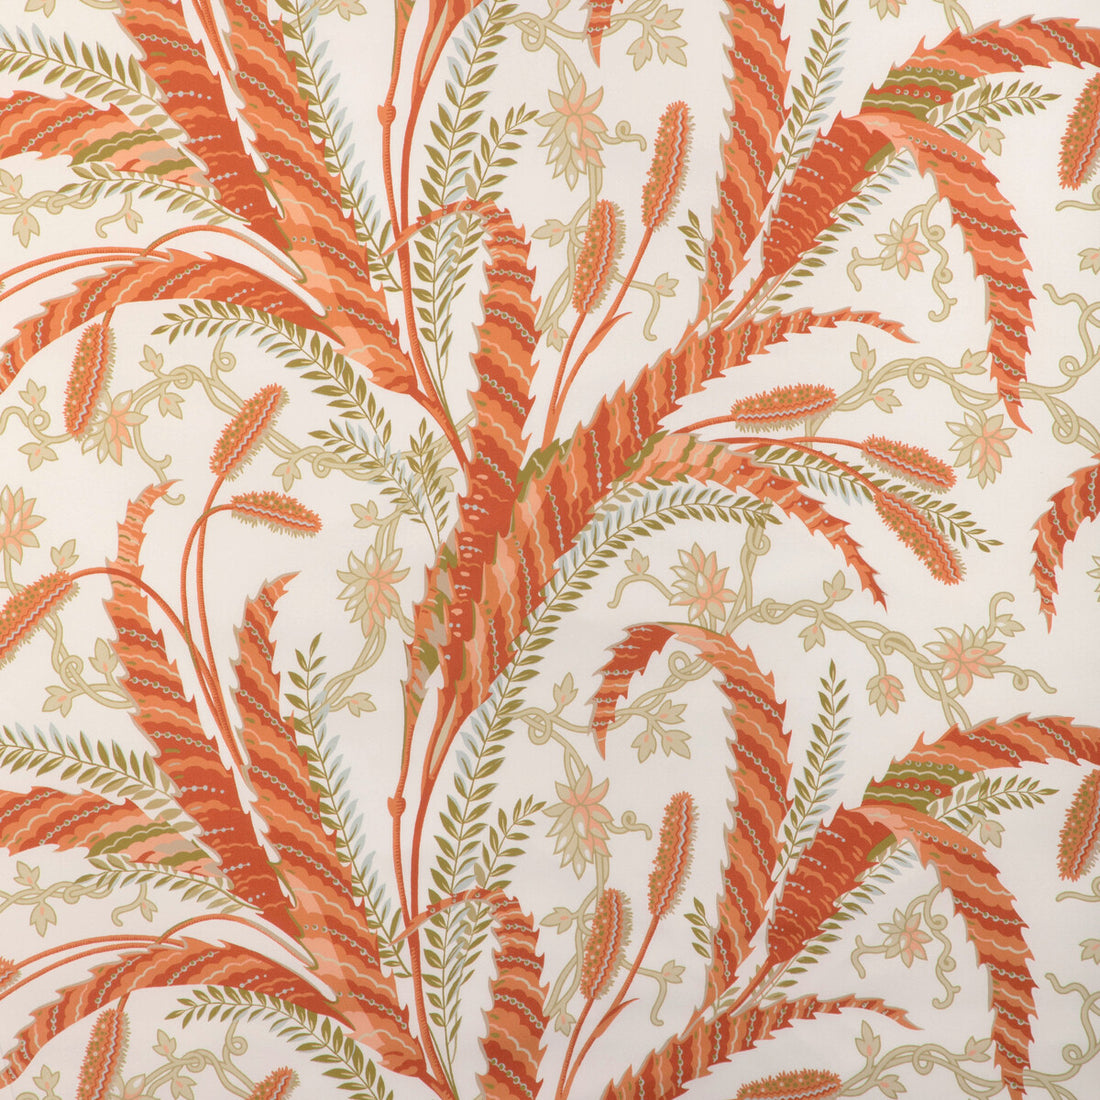 Vernay Print fabric in apricot color - pattern 8023101.12.0 - by Brunschwig &amp; Fils in the Cadenet collection